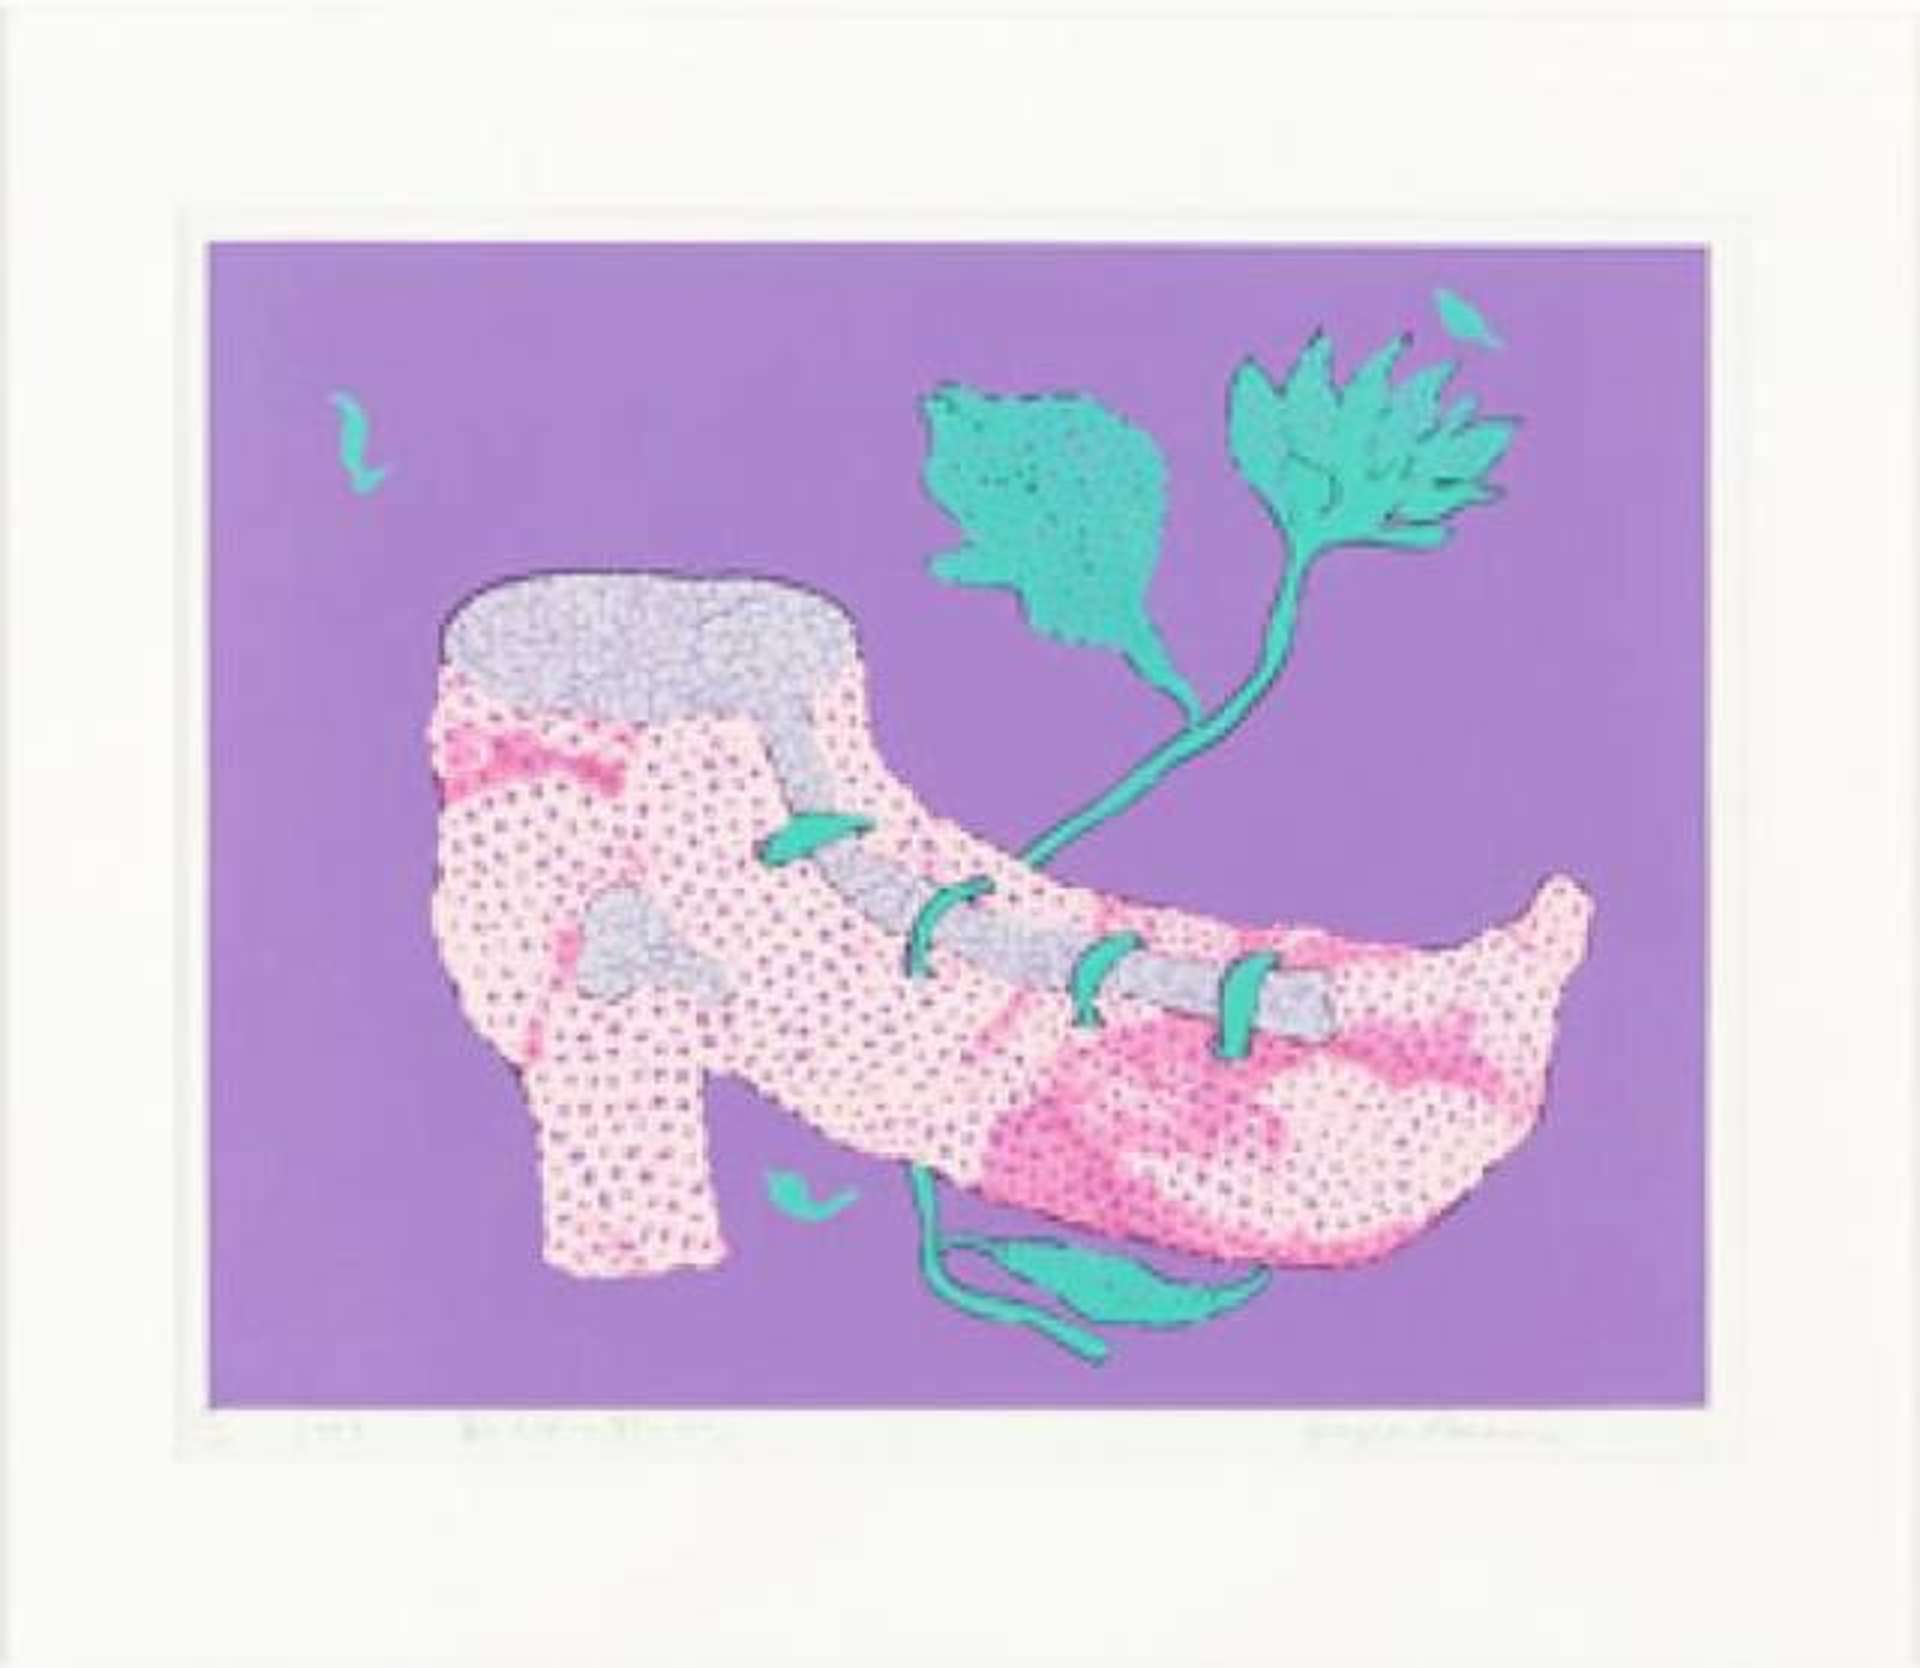 Yayoi Kusama: Going To The Field With Shoes On - Signed Print